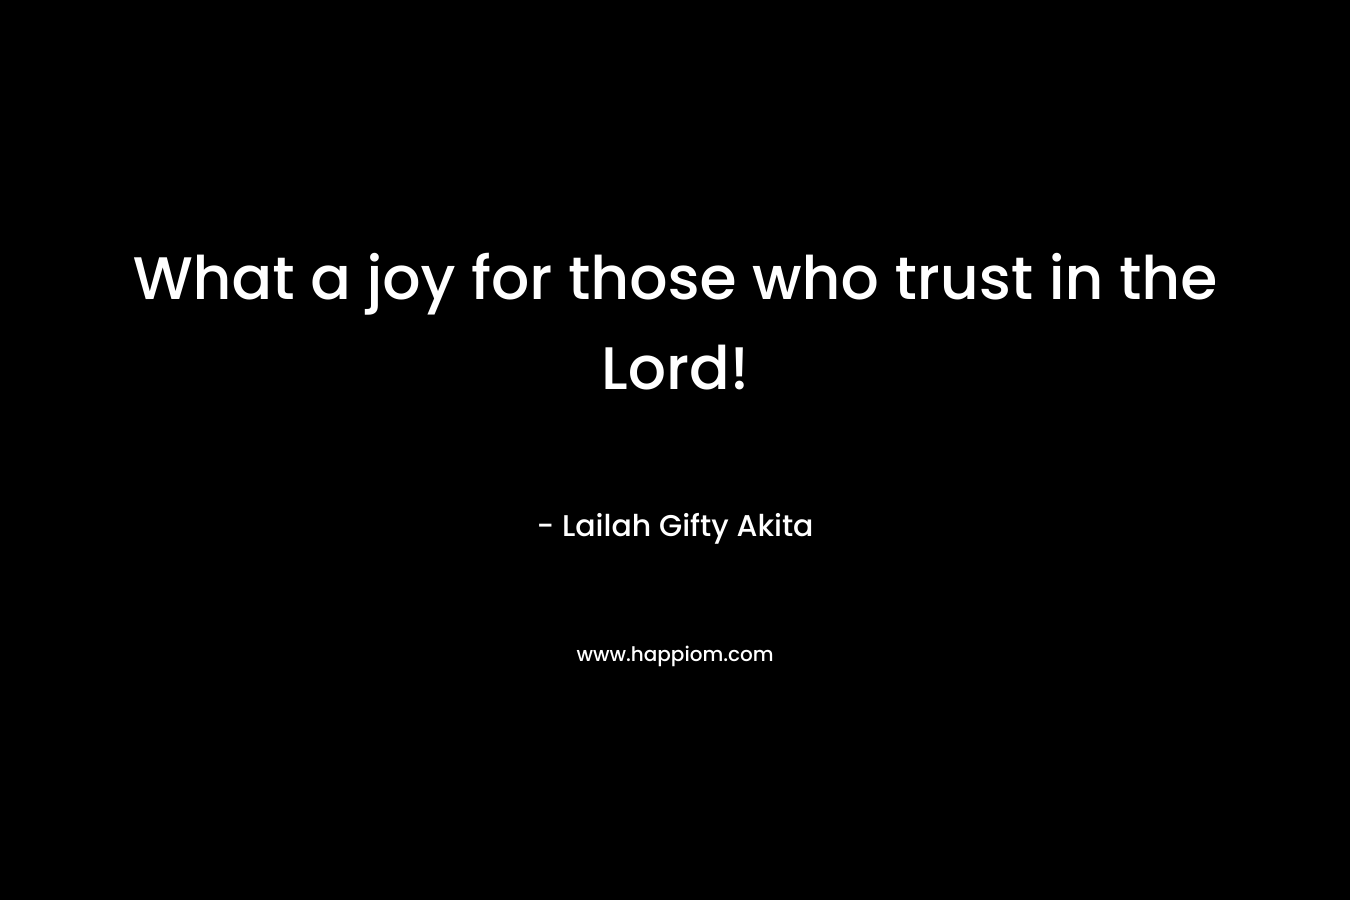 What a joy for those who trust in the Lord!